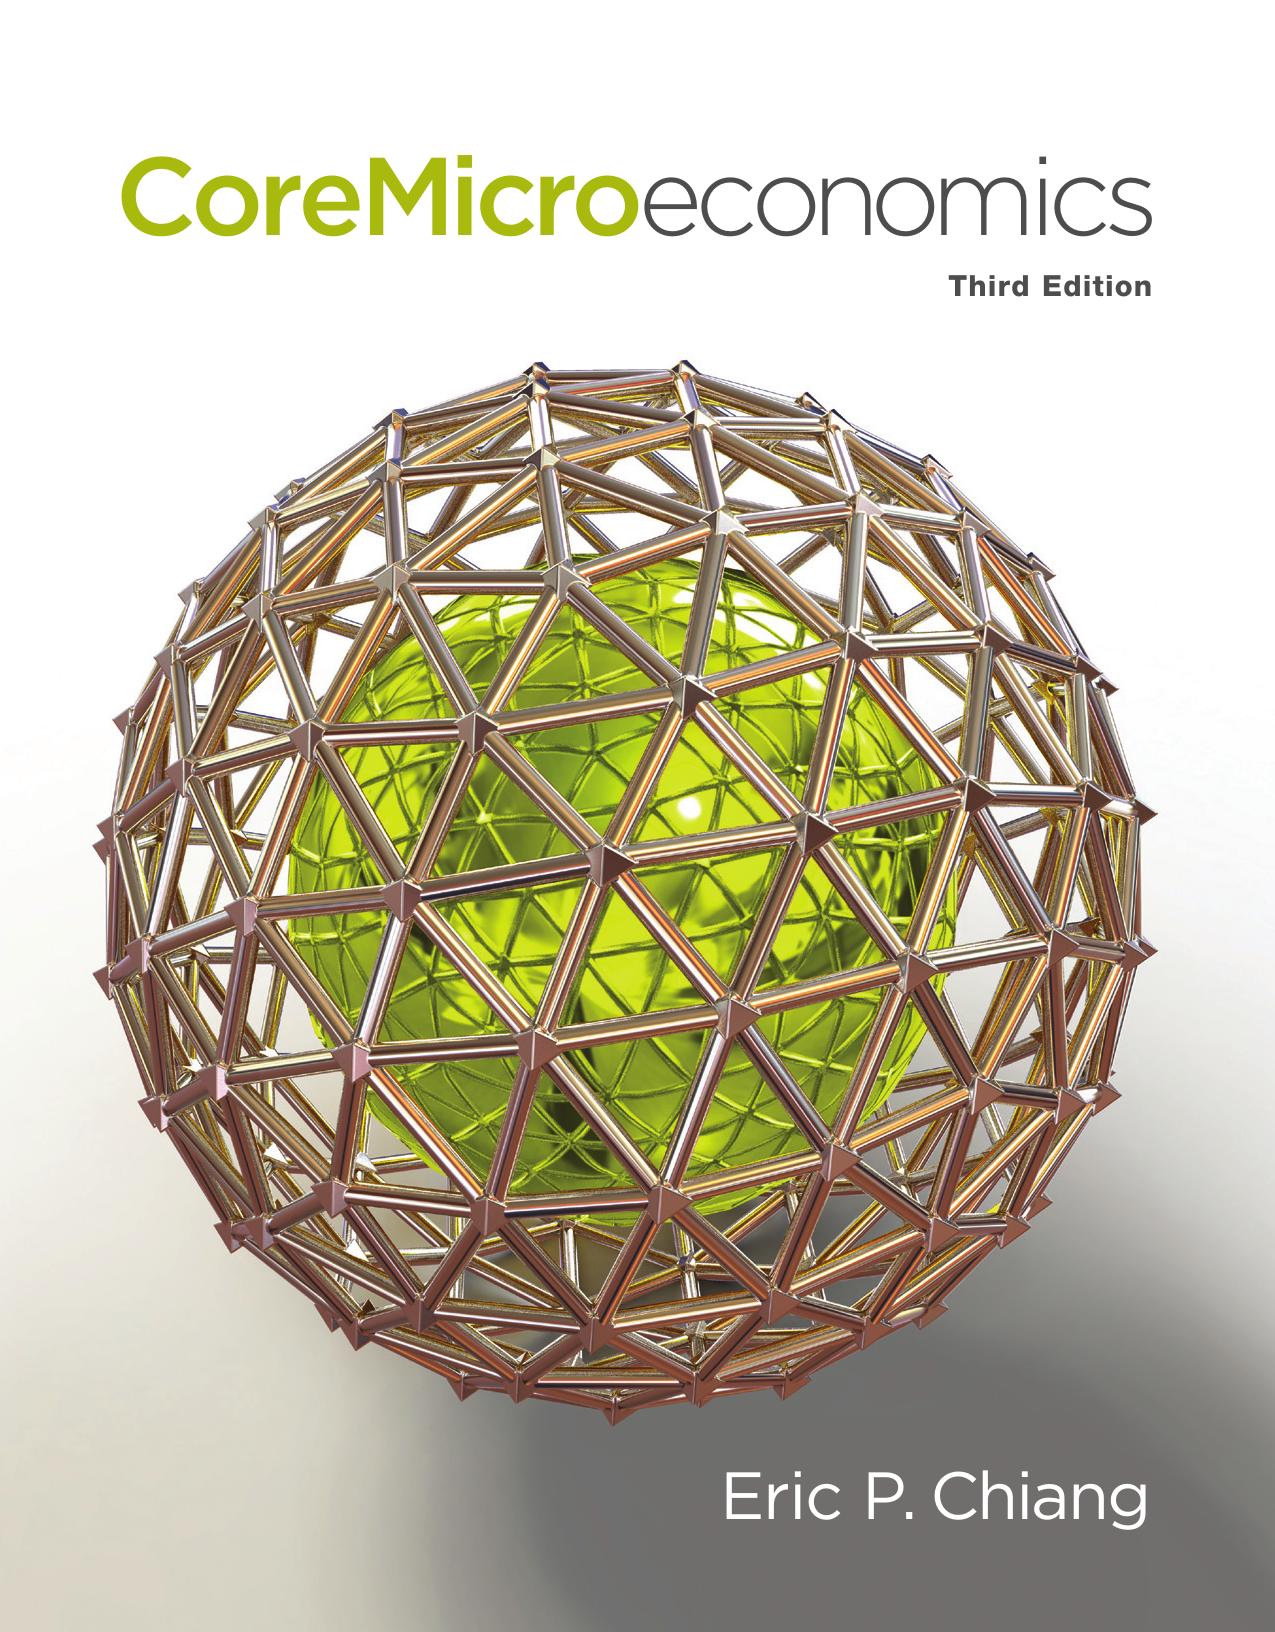 CoreMicroeconomics 3rd Edition by Eric P. Chiang.jpg